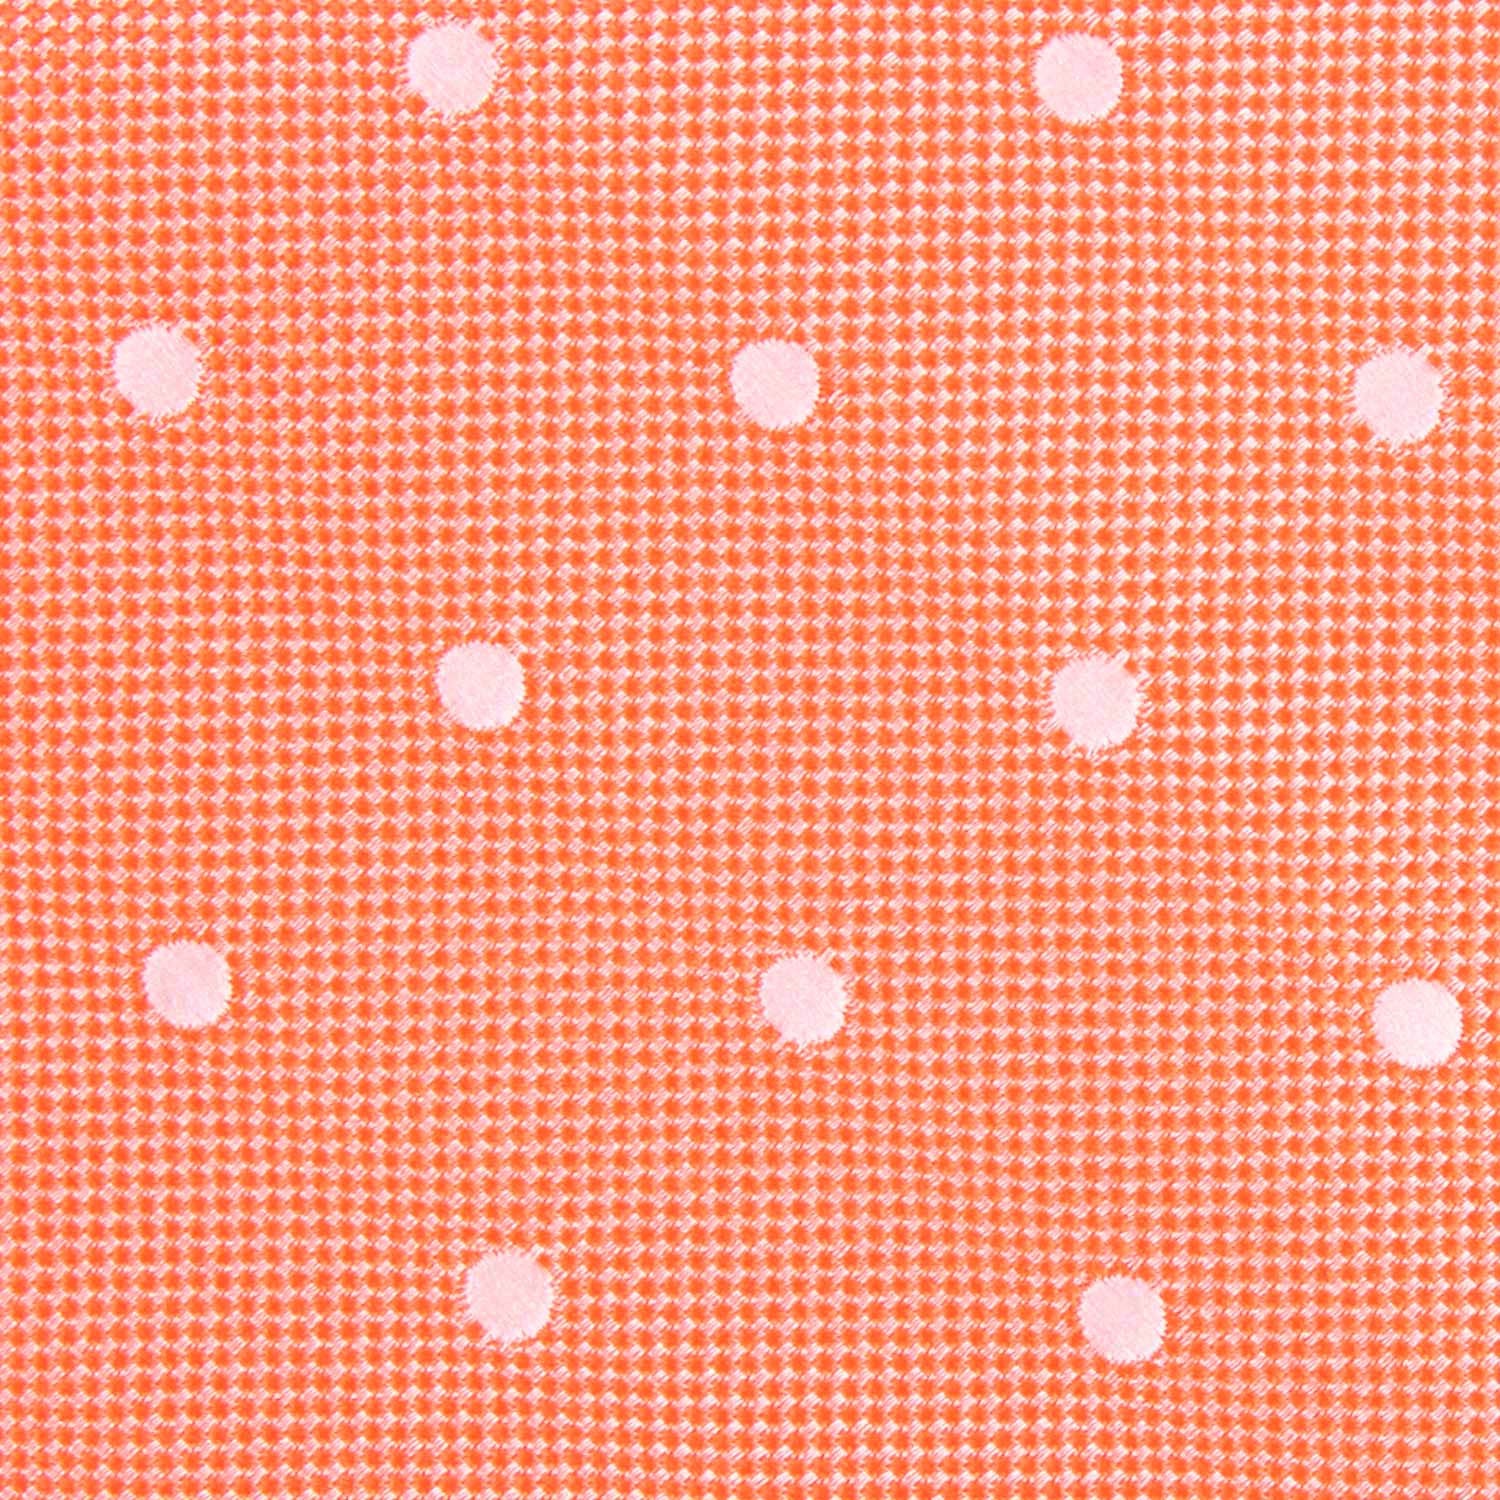 Coral Orange with White Polka Dots Fabric Kids Bow Tie M142